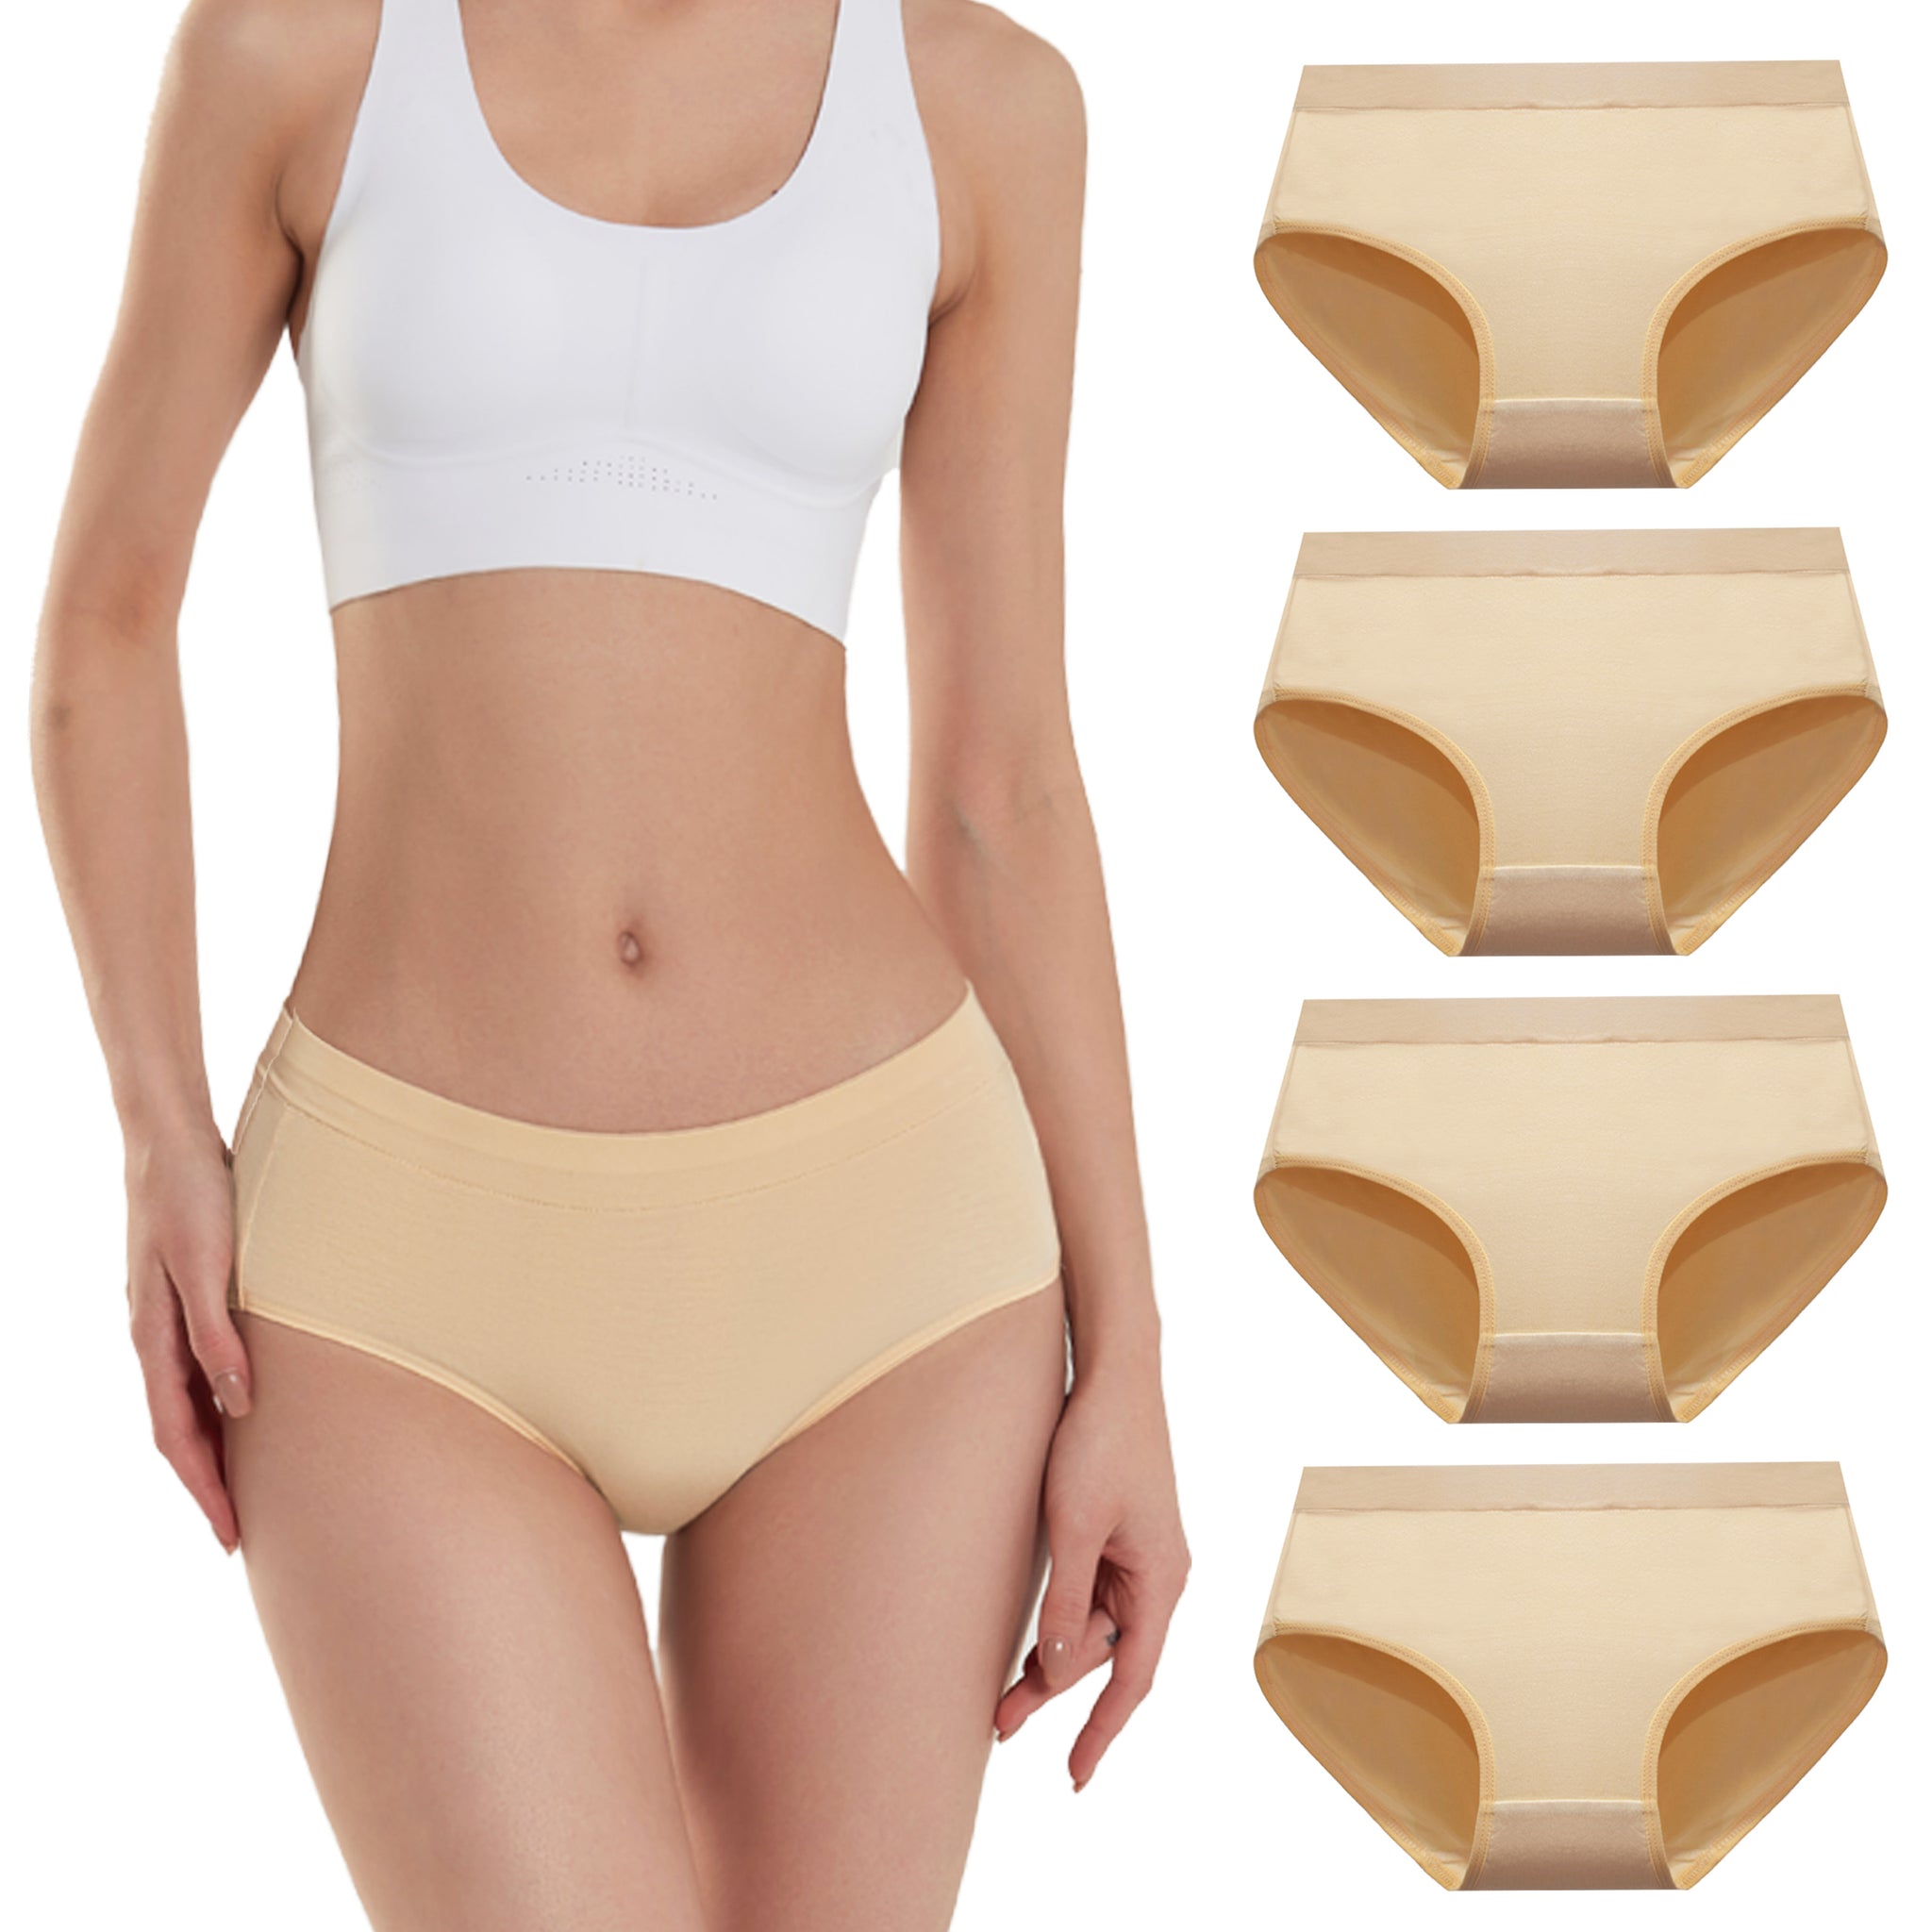 SERISIMPLE Bamboo Women Luxury Underwear Silky Comfy Ultra Soft Briefs  Breathable Stretch High&Mid Waist Panties 4 Pack